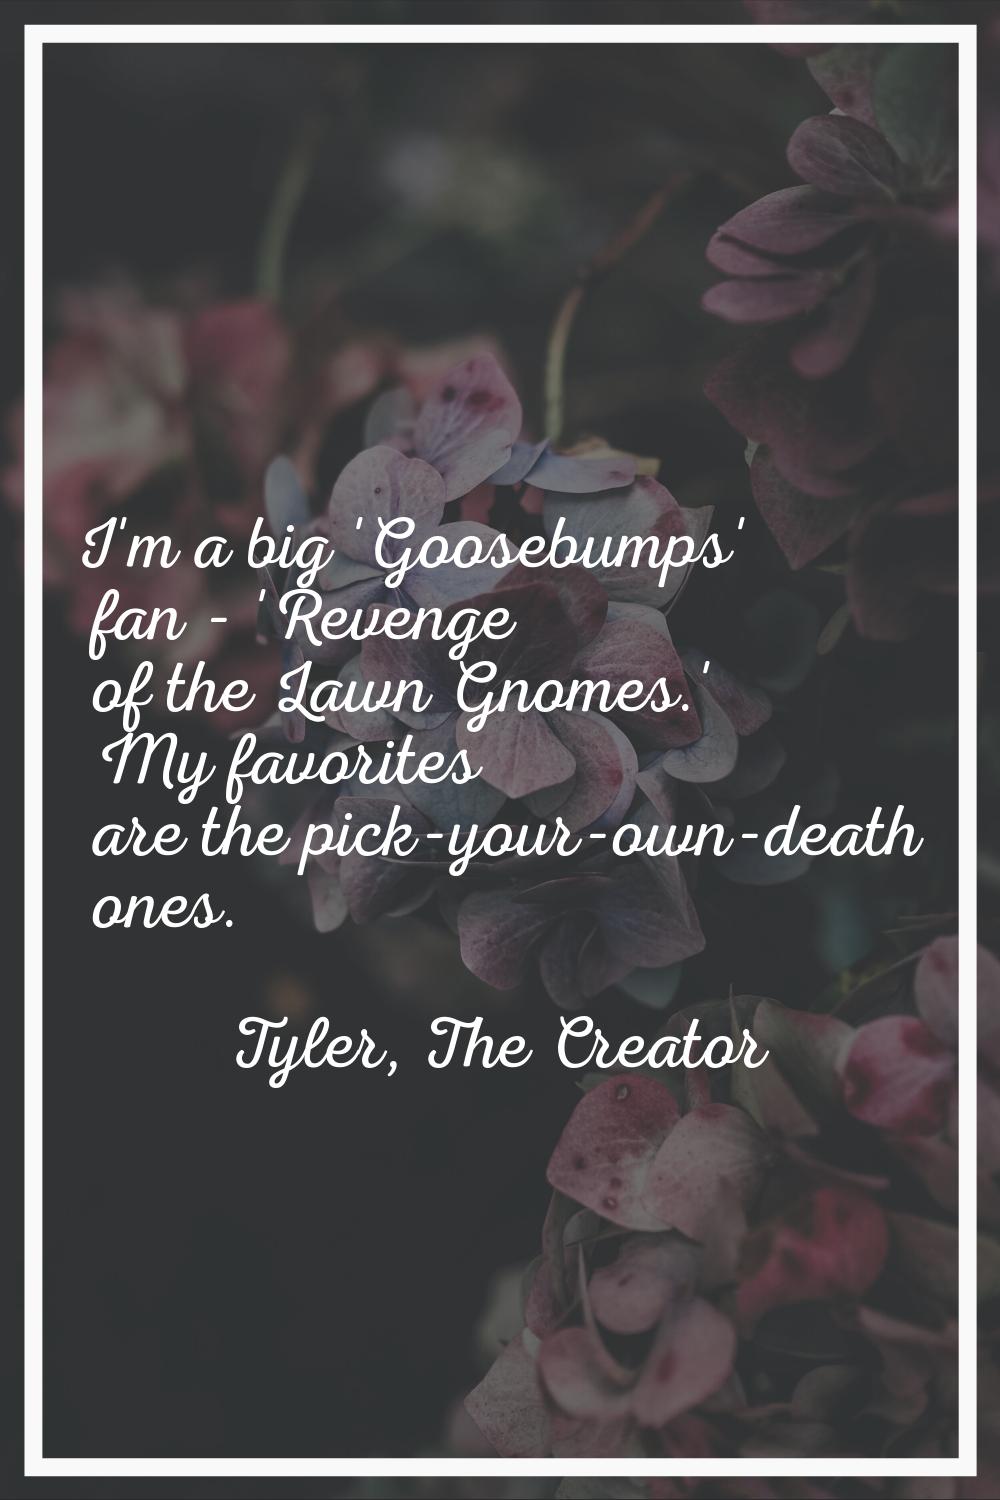 I'm a big 'Goosebumps' fan - 'Revenge of the Lawn Gnomes.' My favorites are the pick-your-own-death